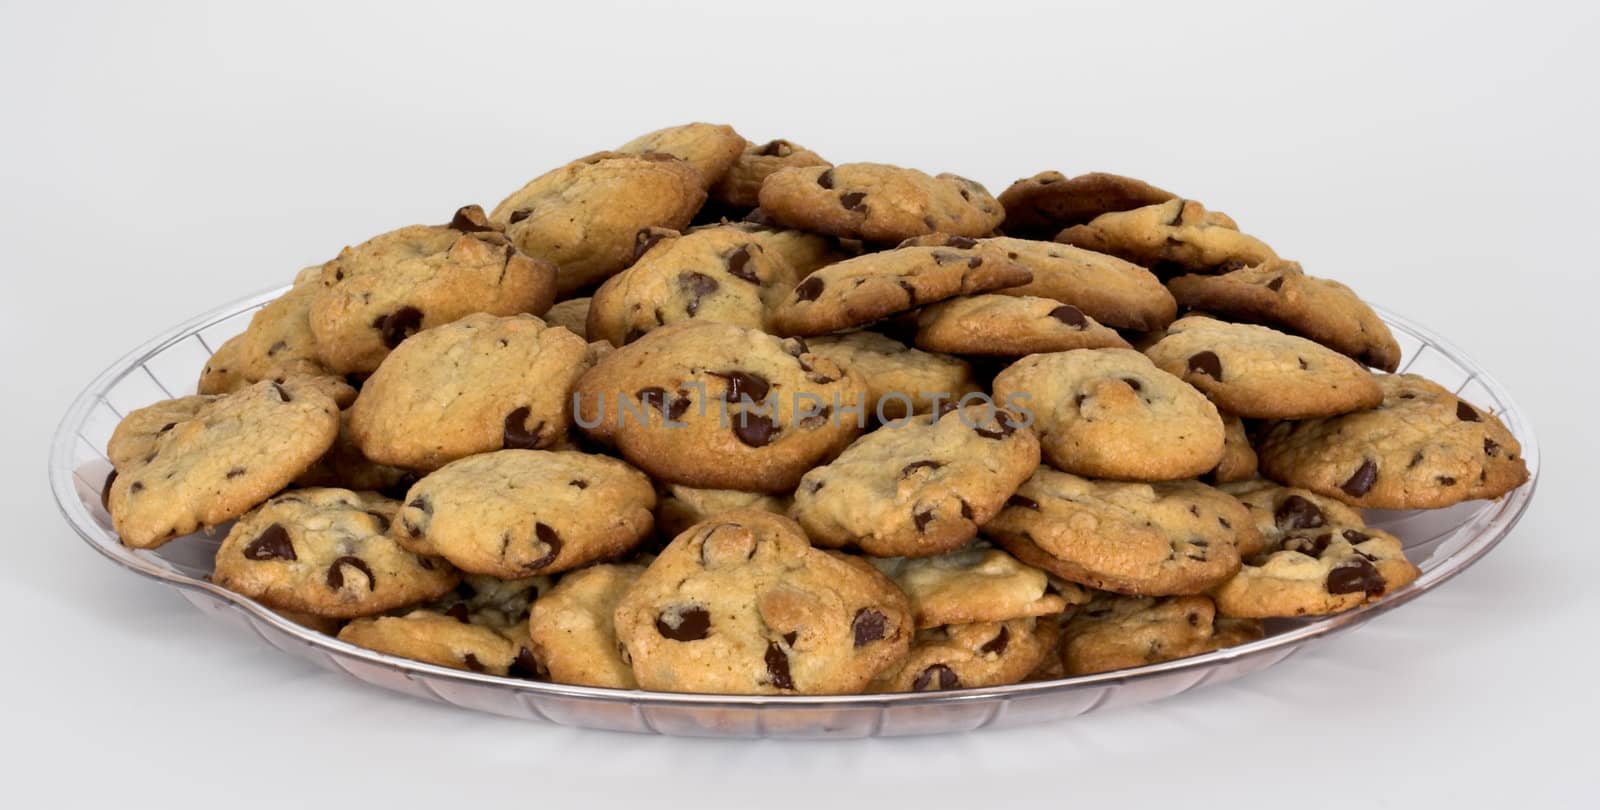 Tray of Chocolate Chip Cookies by sbonk